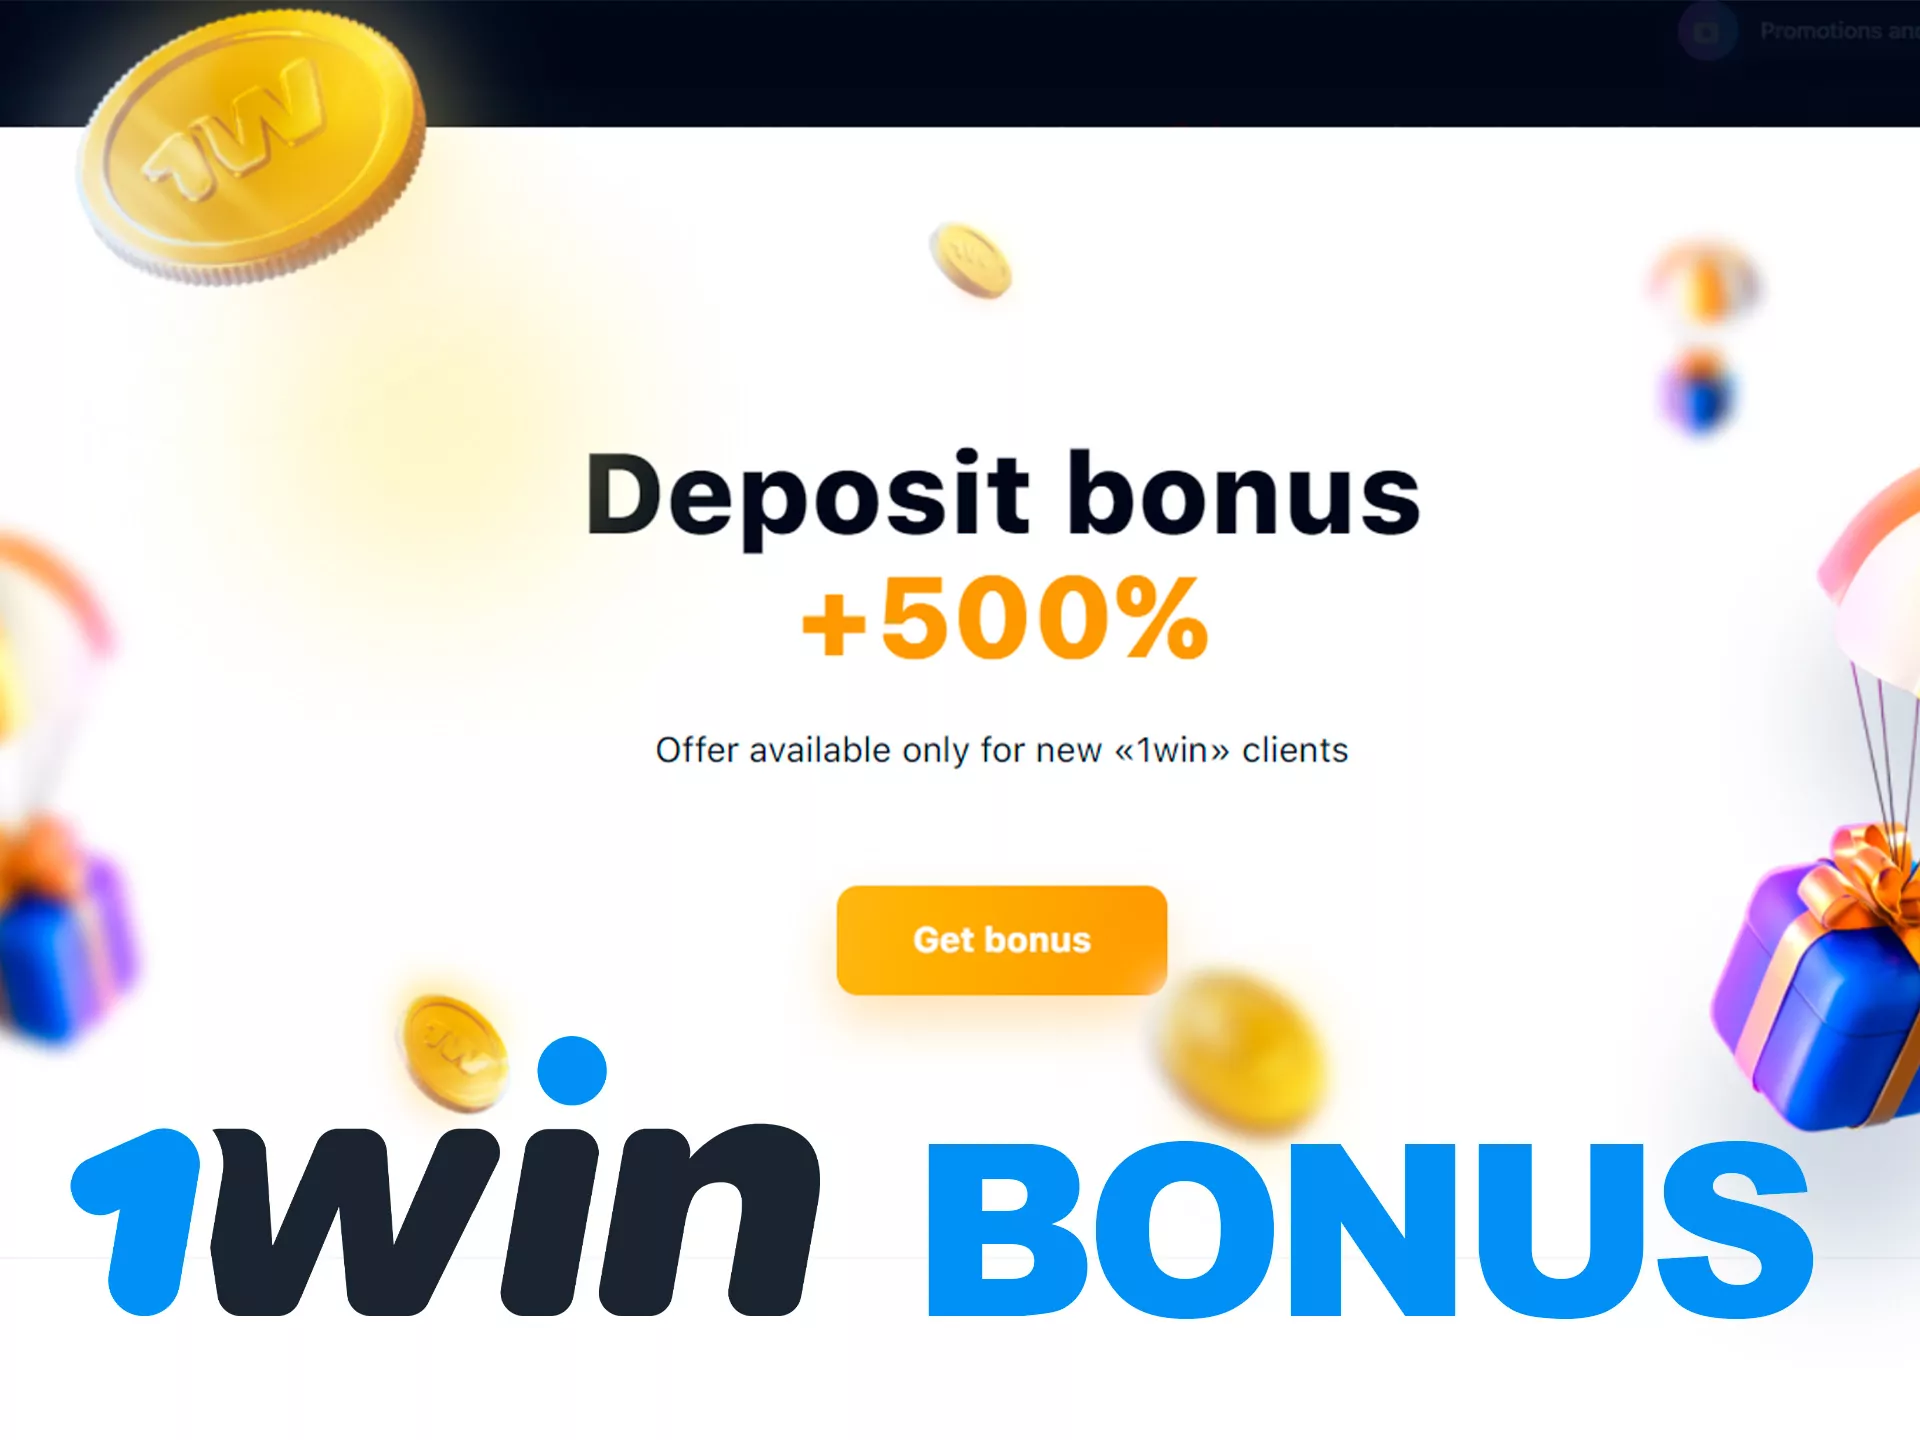 Secrets To Getting bonus casino 1win To Complete Tasks Quickly And Efficiently